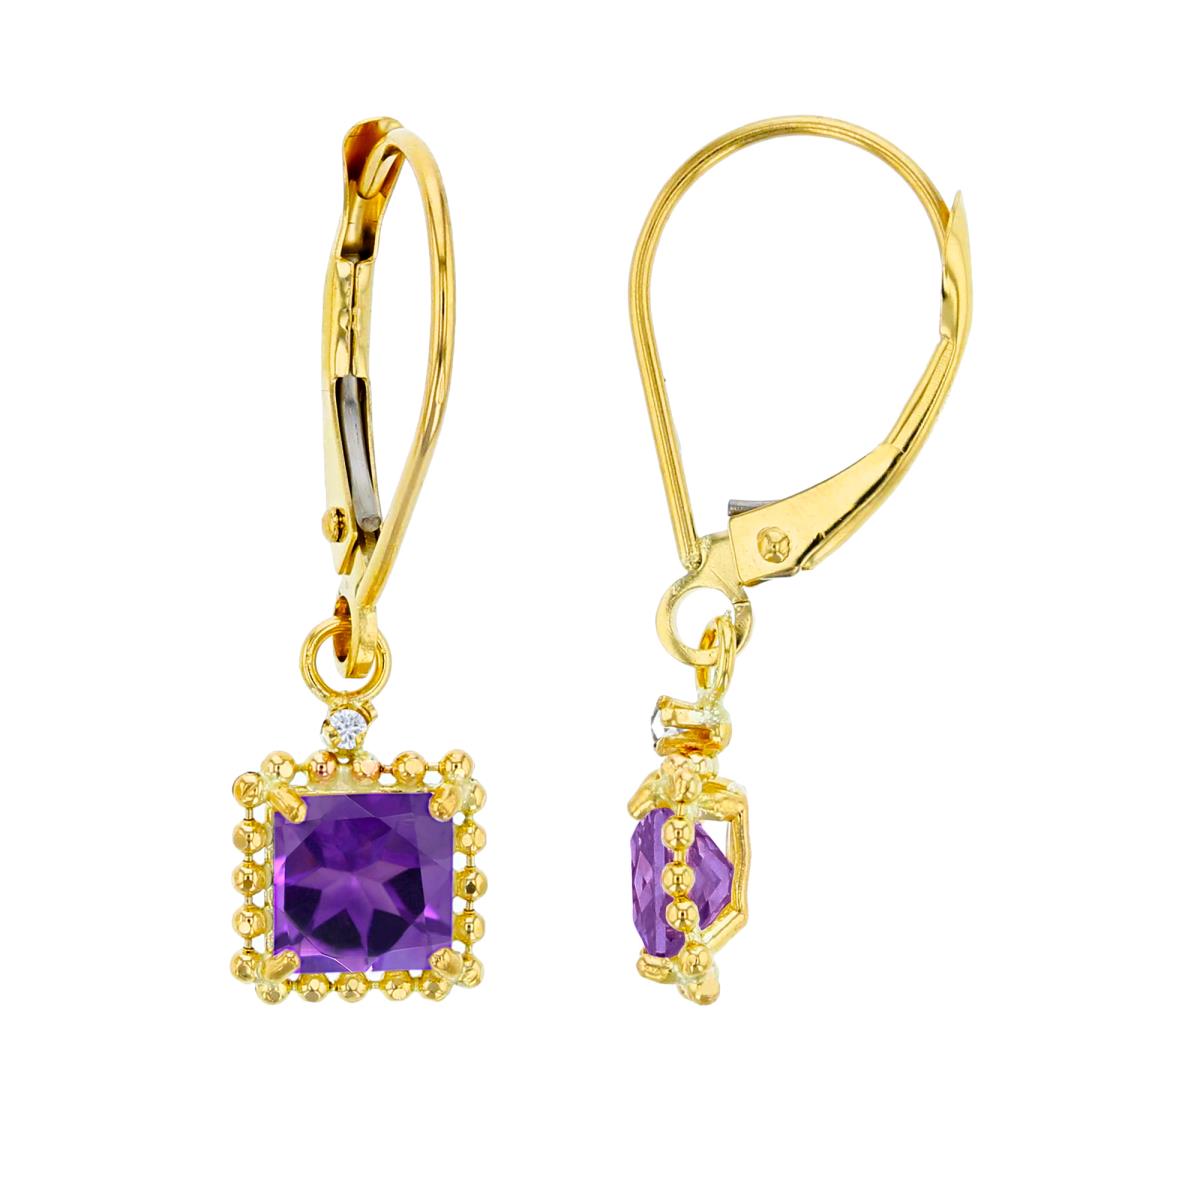 10K Yellow Gold 1.25mm Rd Created White Sapphire & 5mm Sq Amethyst Bead Frame Drop Lever-Back Earring